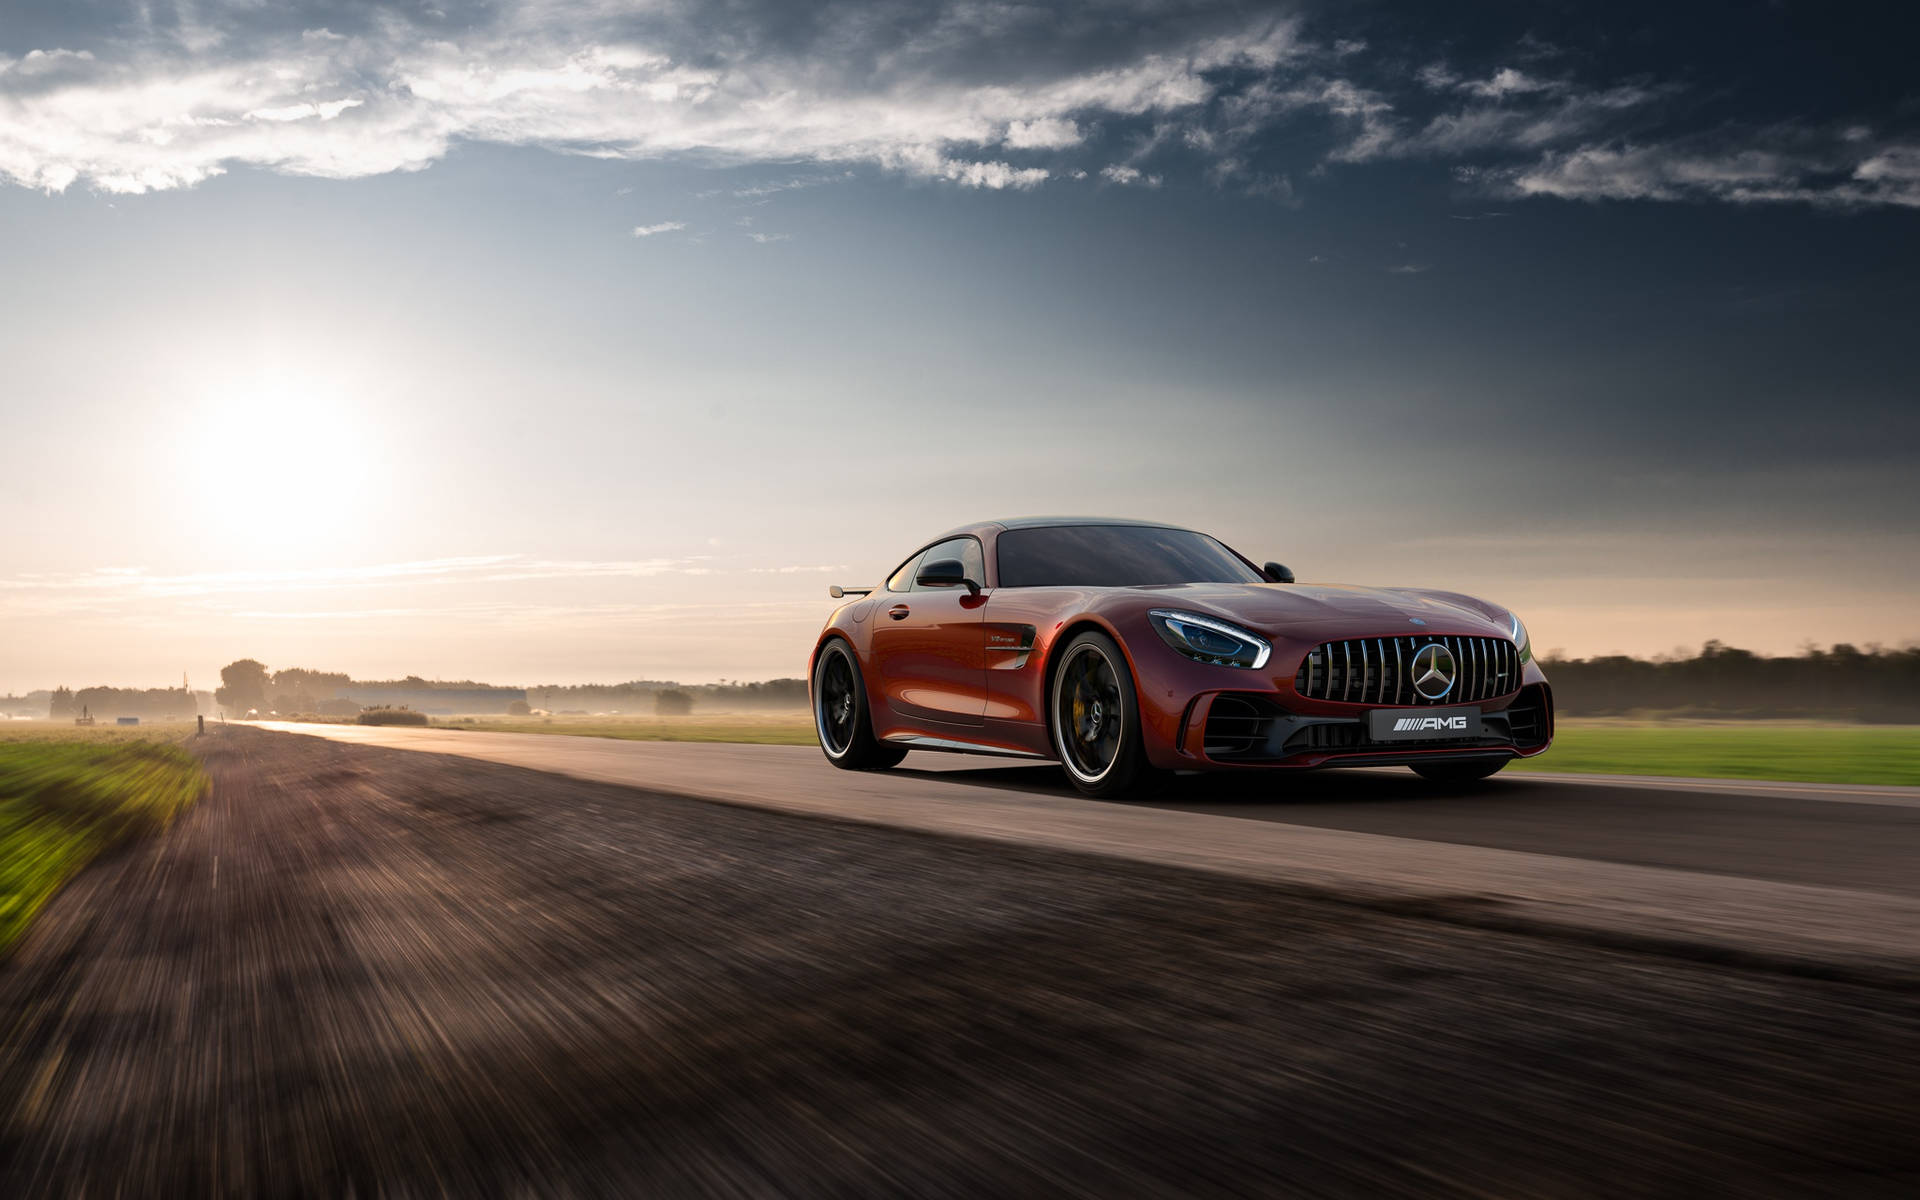 Amg Gtr Zooming Fast Background